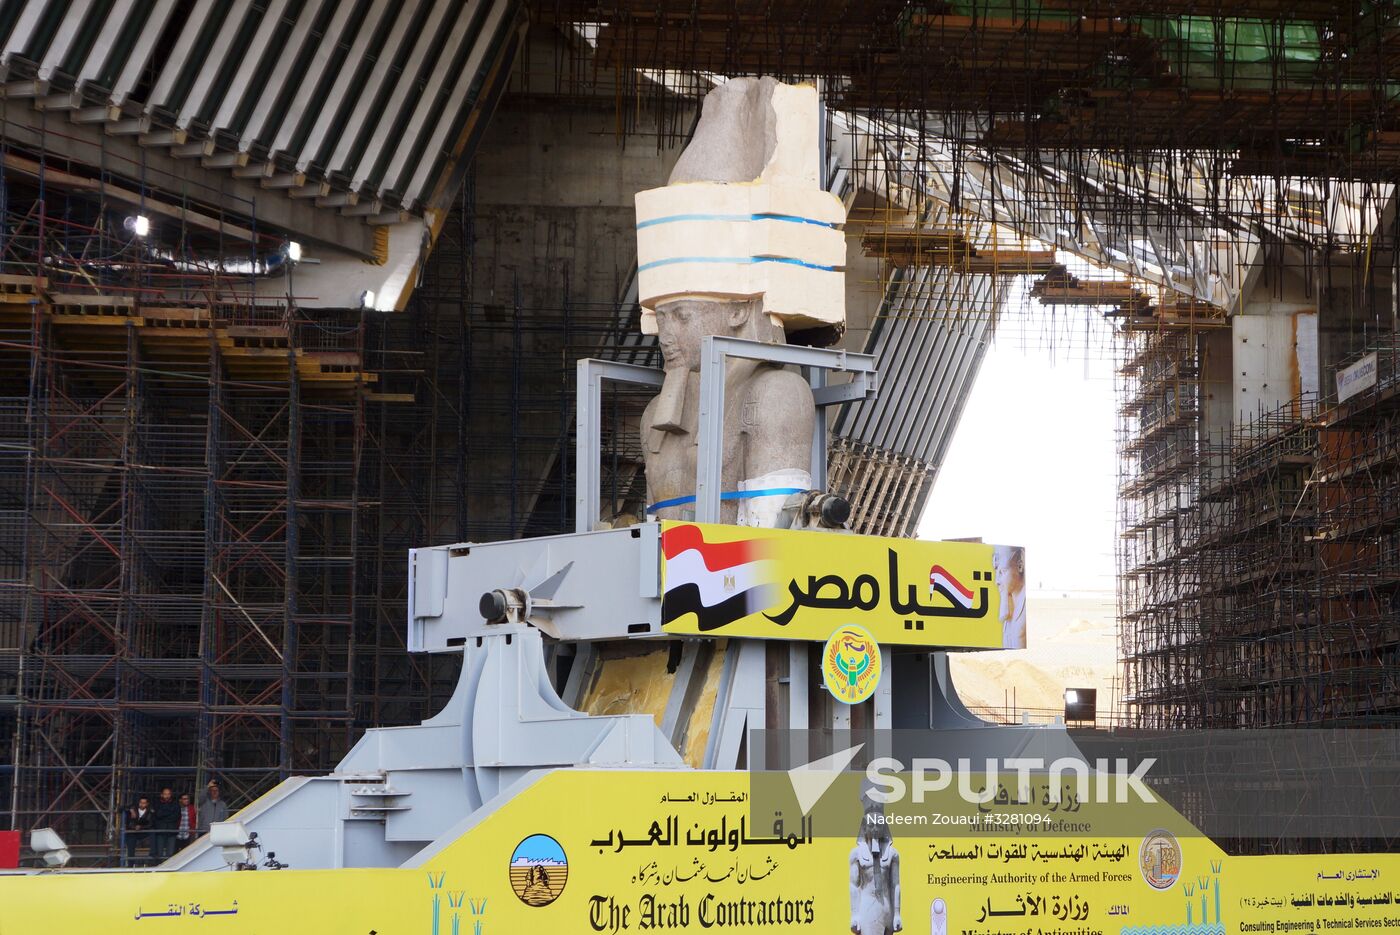 Statue of Egyptian pharaoh Ramses II relocated